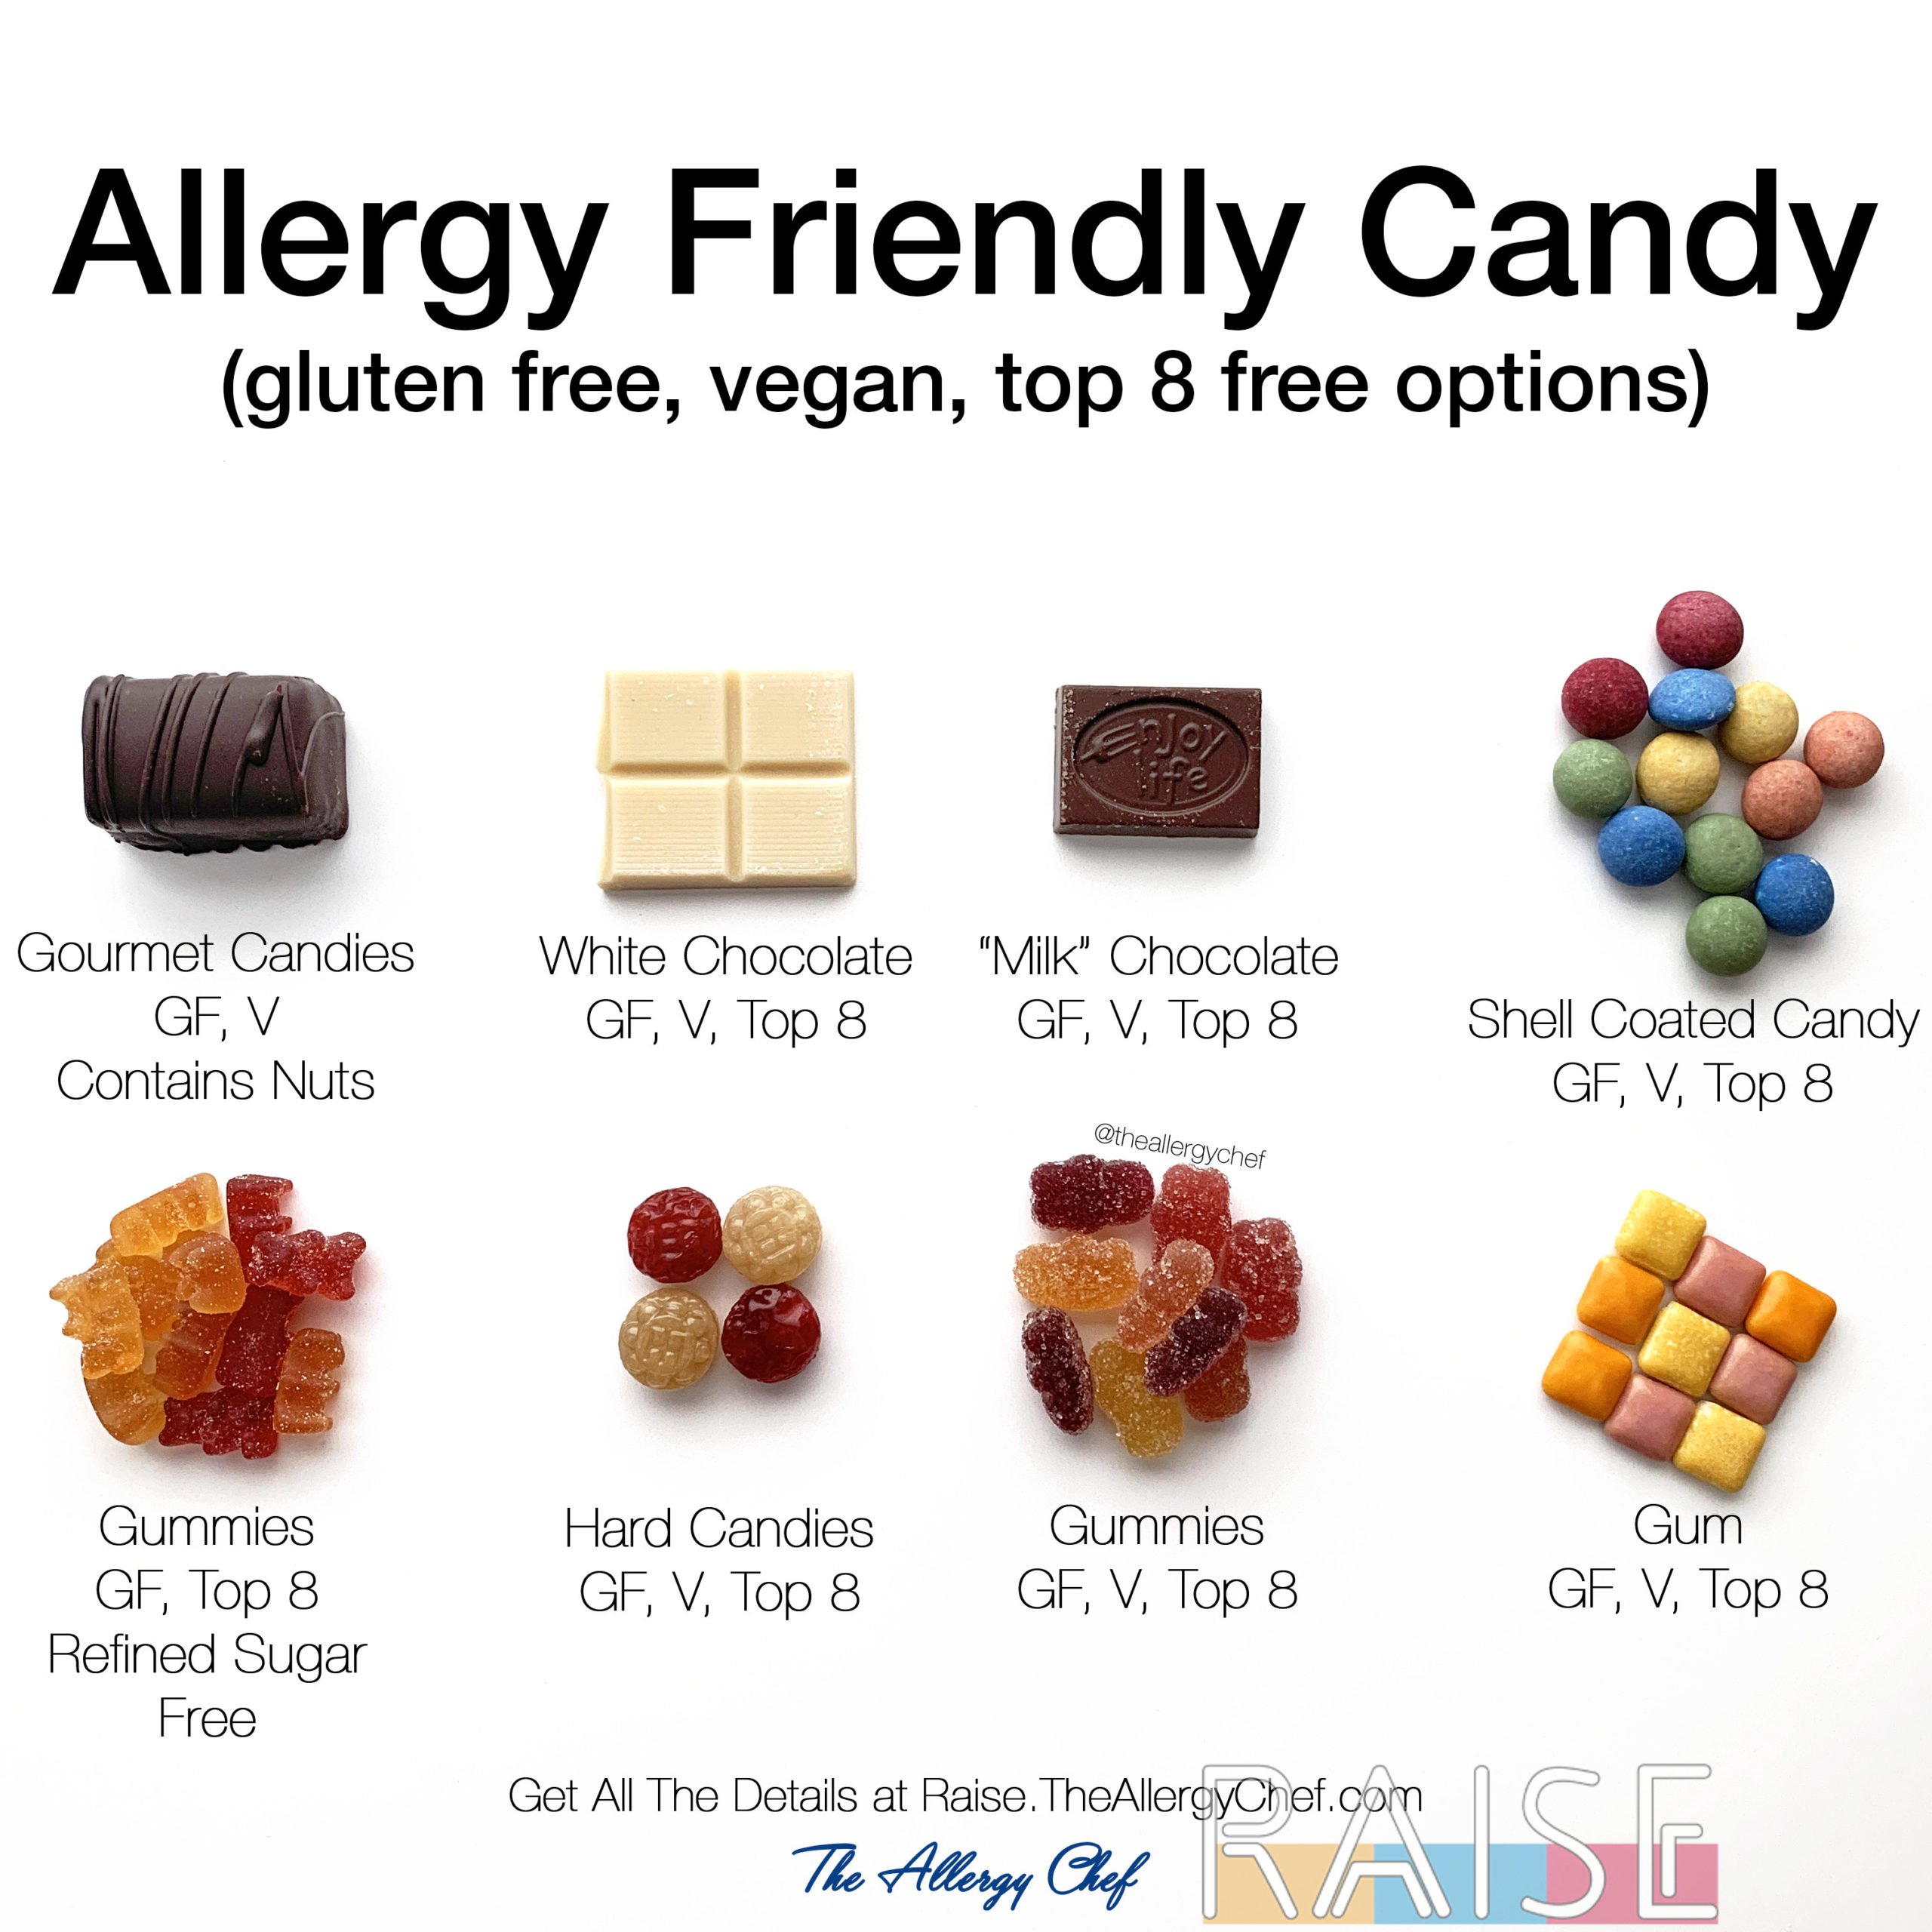 No Whey Chocolate Candy Bars Review: Top Allergen-Free!